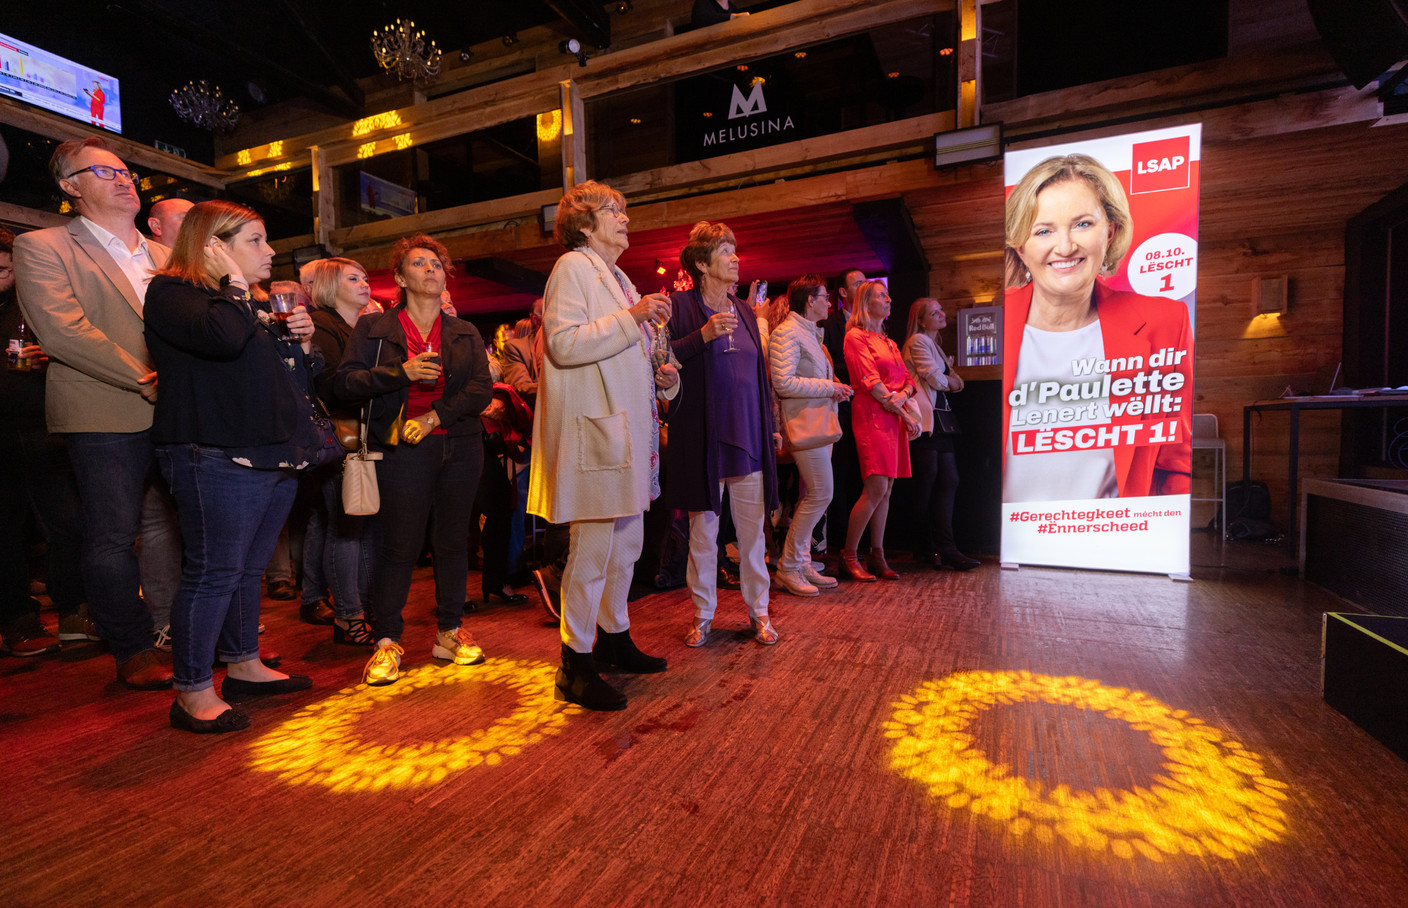 LSAP supporters are seen at the party’s election night headquarters, at Melusina, 8 October 2023. Photo: Guy Wolff/Maison Moderne